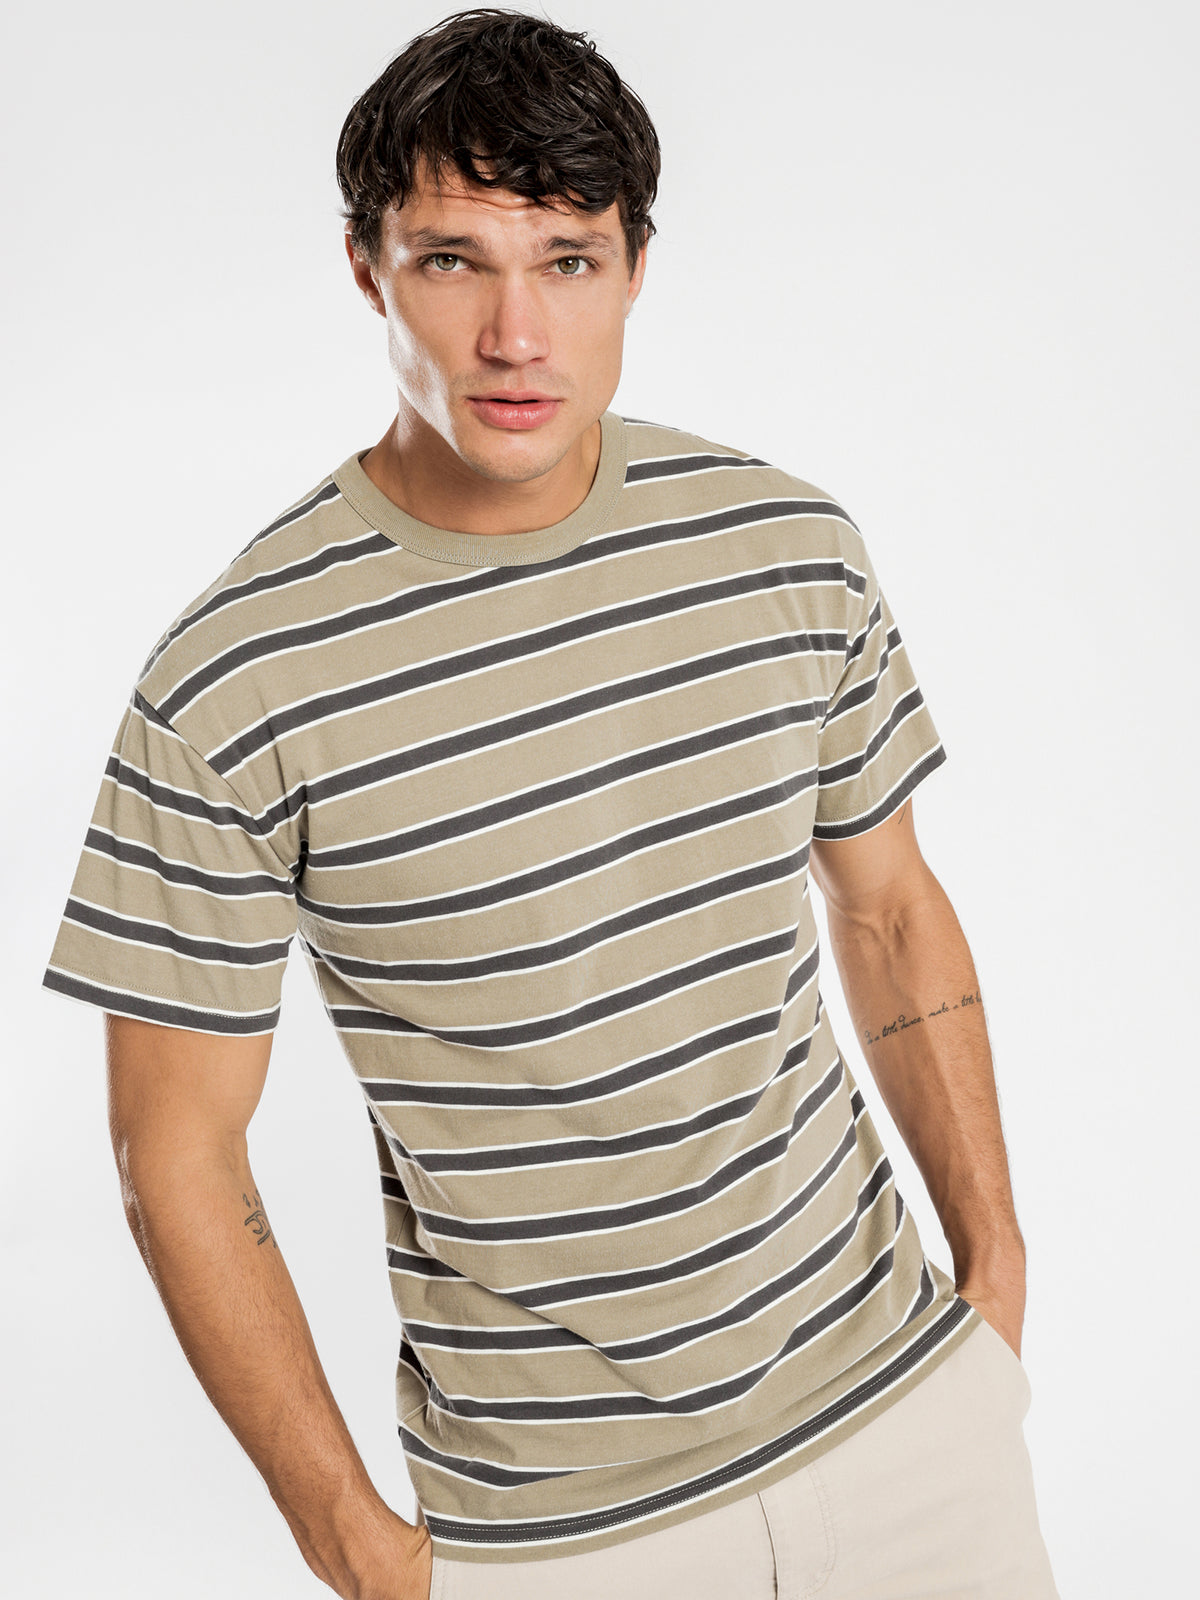 Southport T-Shirt in Olive &amp; Charcoal Stripe